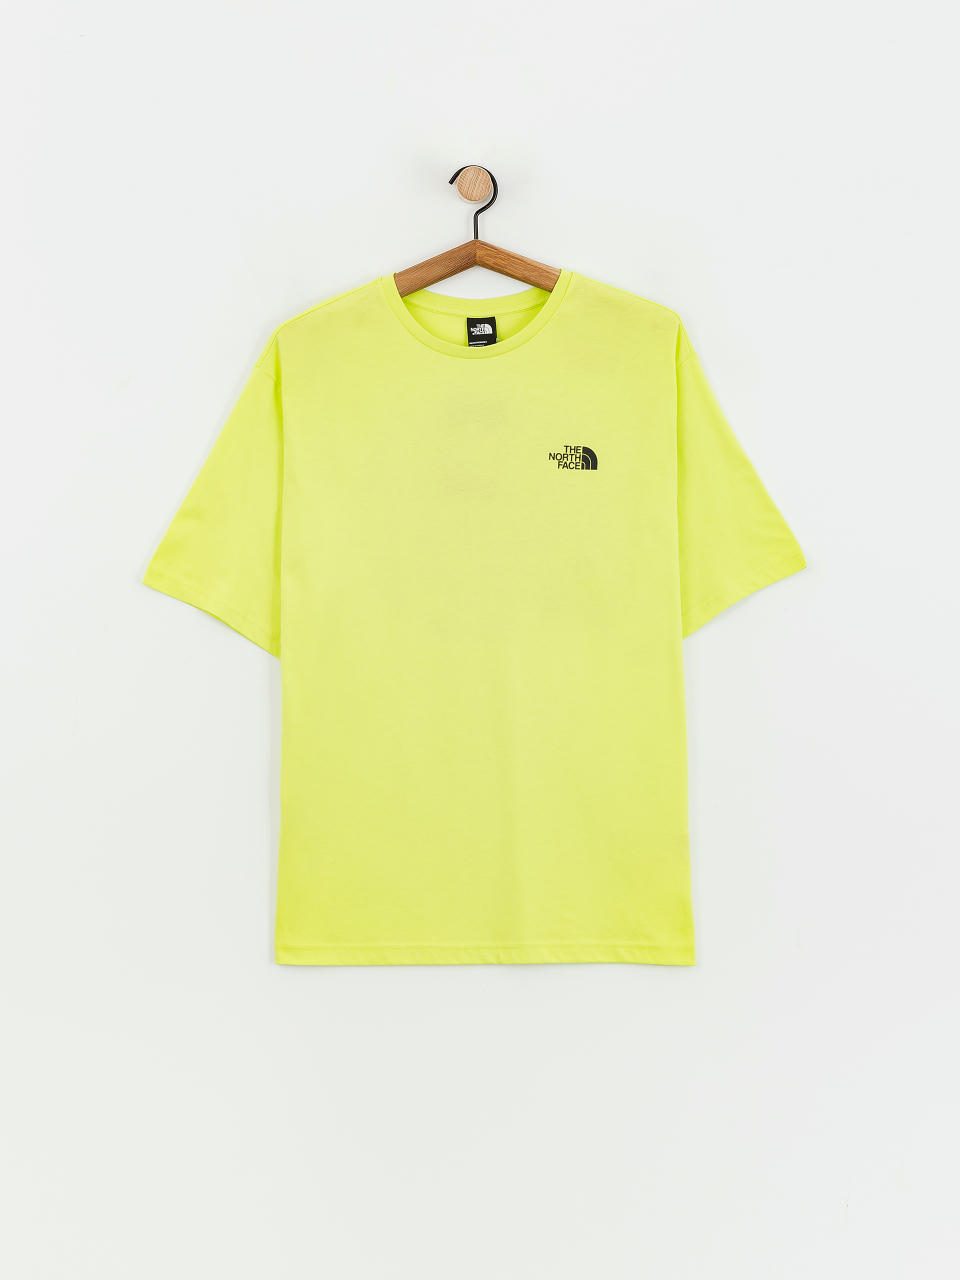 The North Face Festival T-Shirt (fizz lime)